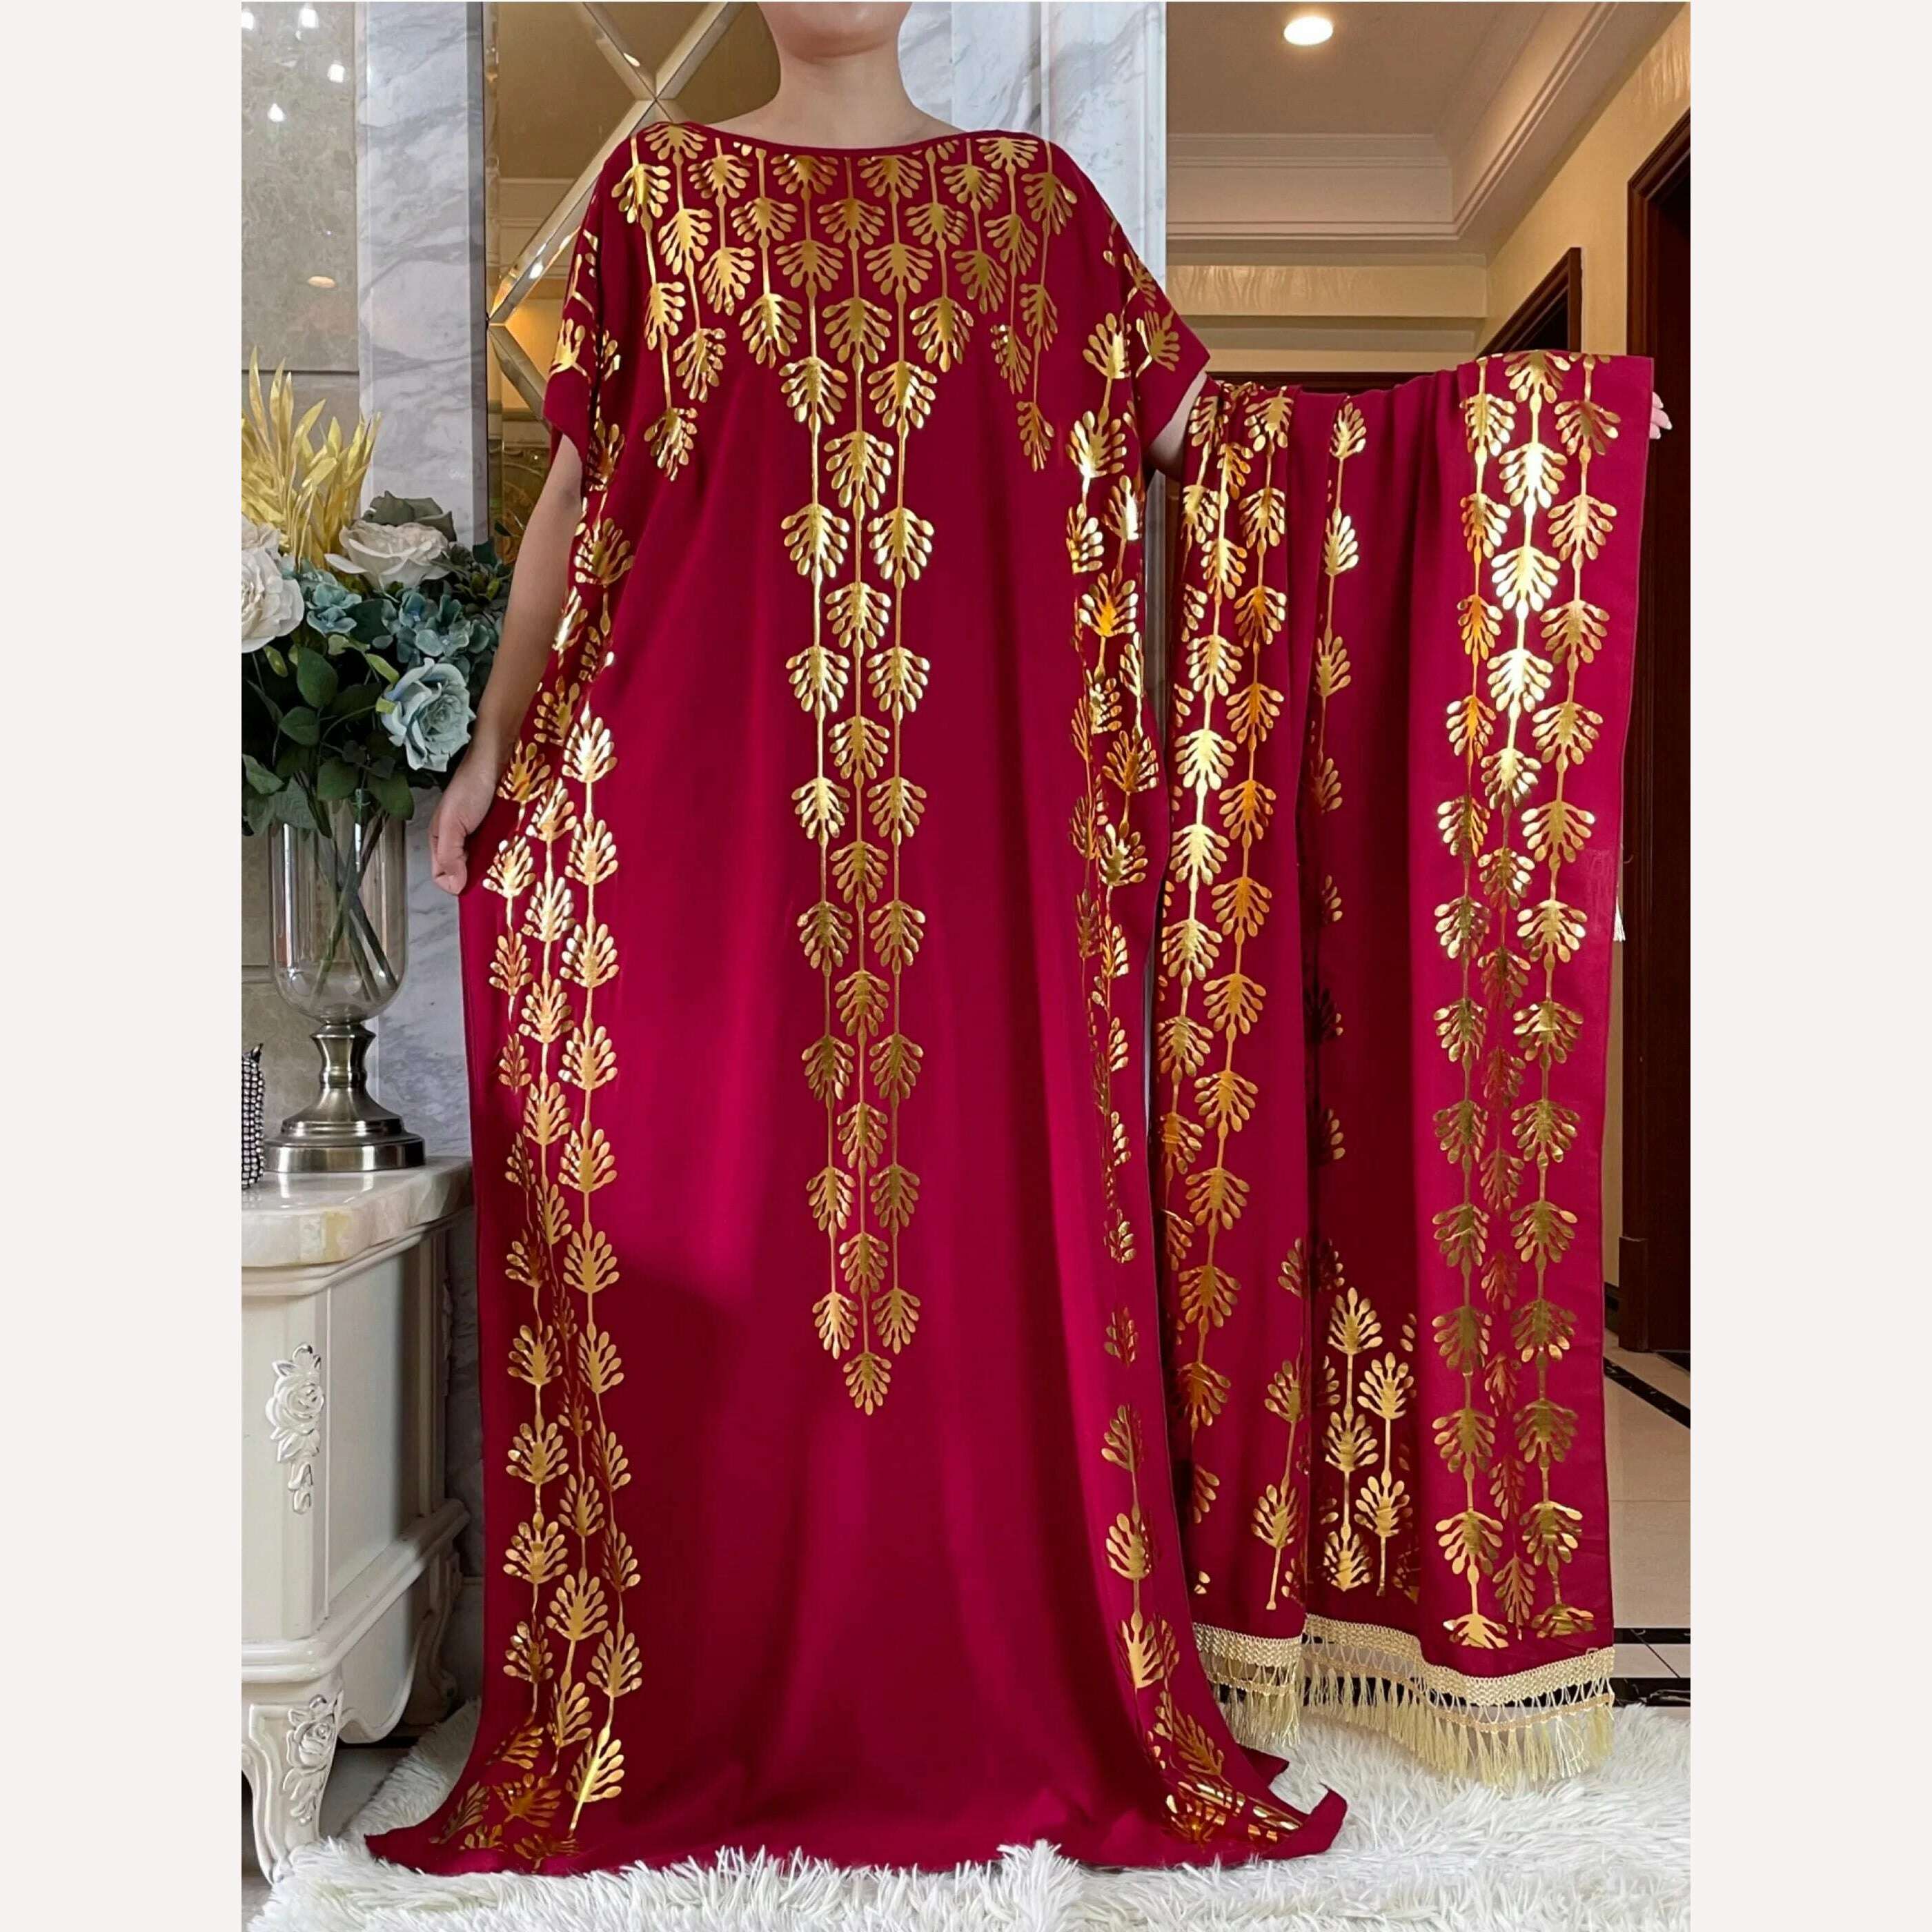 KIMLUD, Dubai New Abaya For Women  Summer Short Sleeve Cotton Dress Gold Stamping Loose Lady Maxi Islam African Dress With Big Scarf, HB438-5 / One Size, KIMLUD Women's Clothes